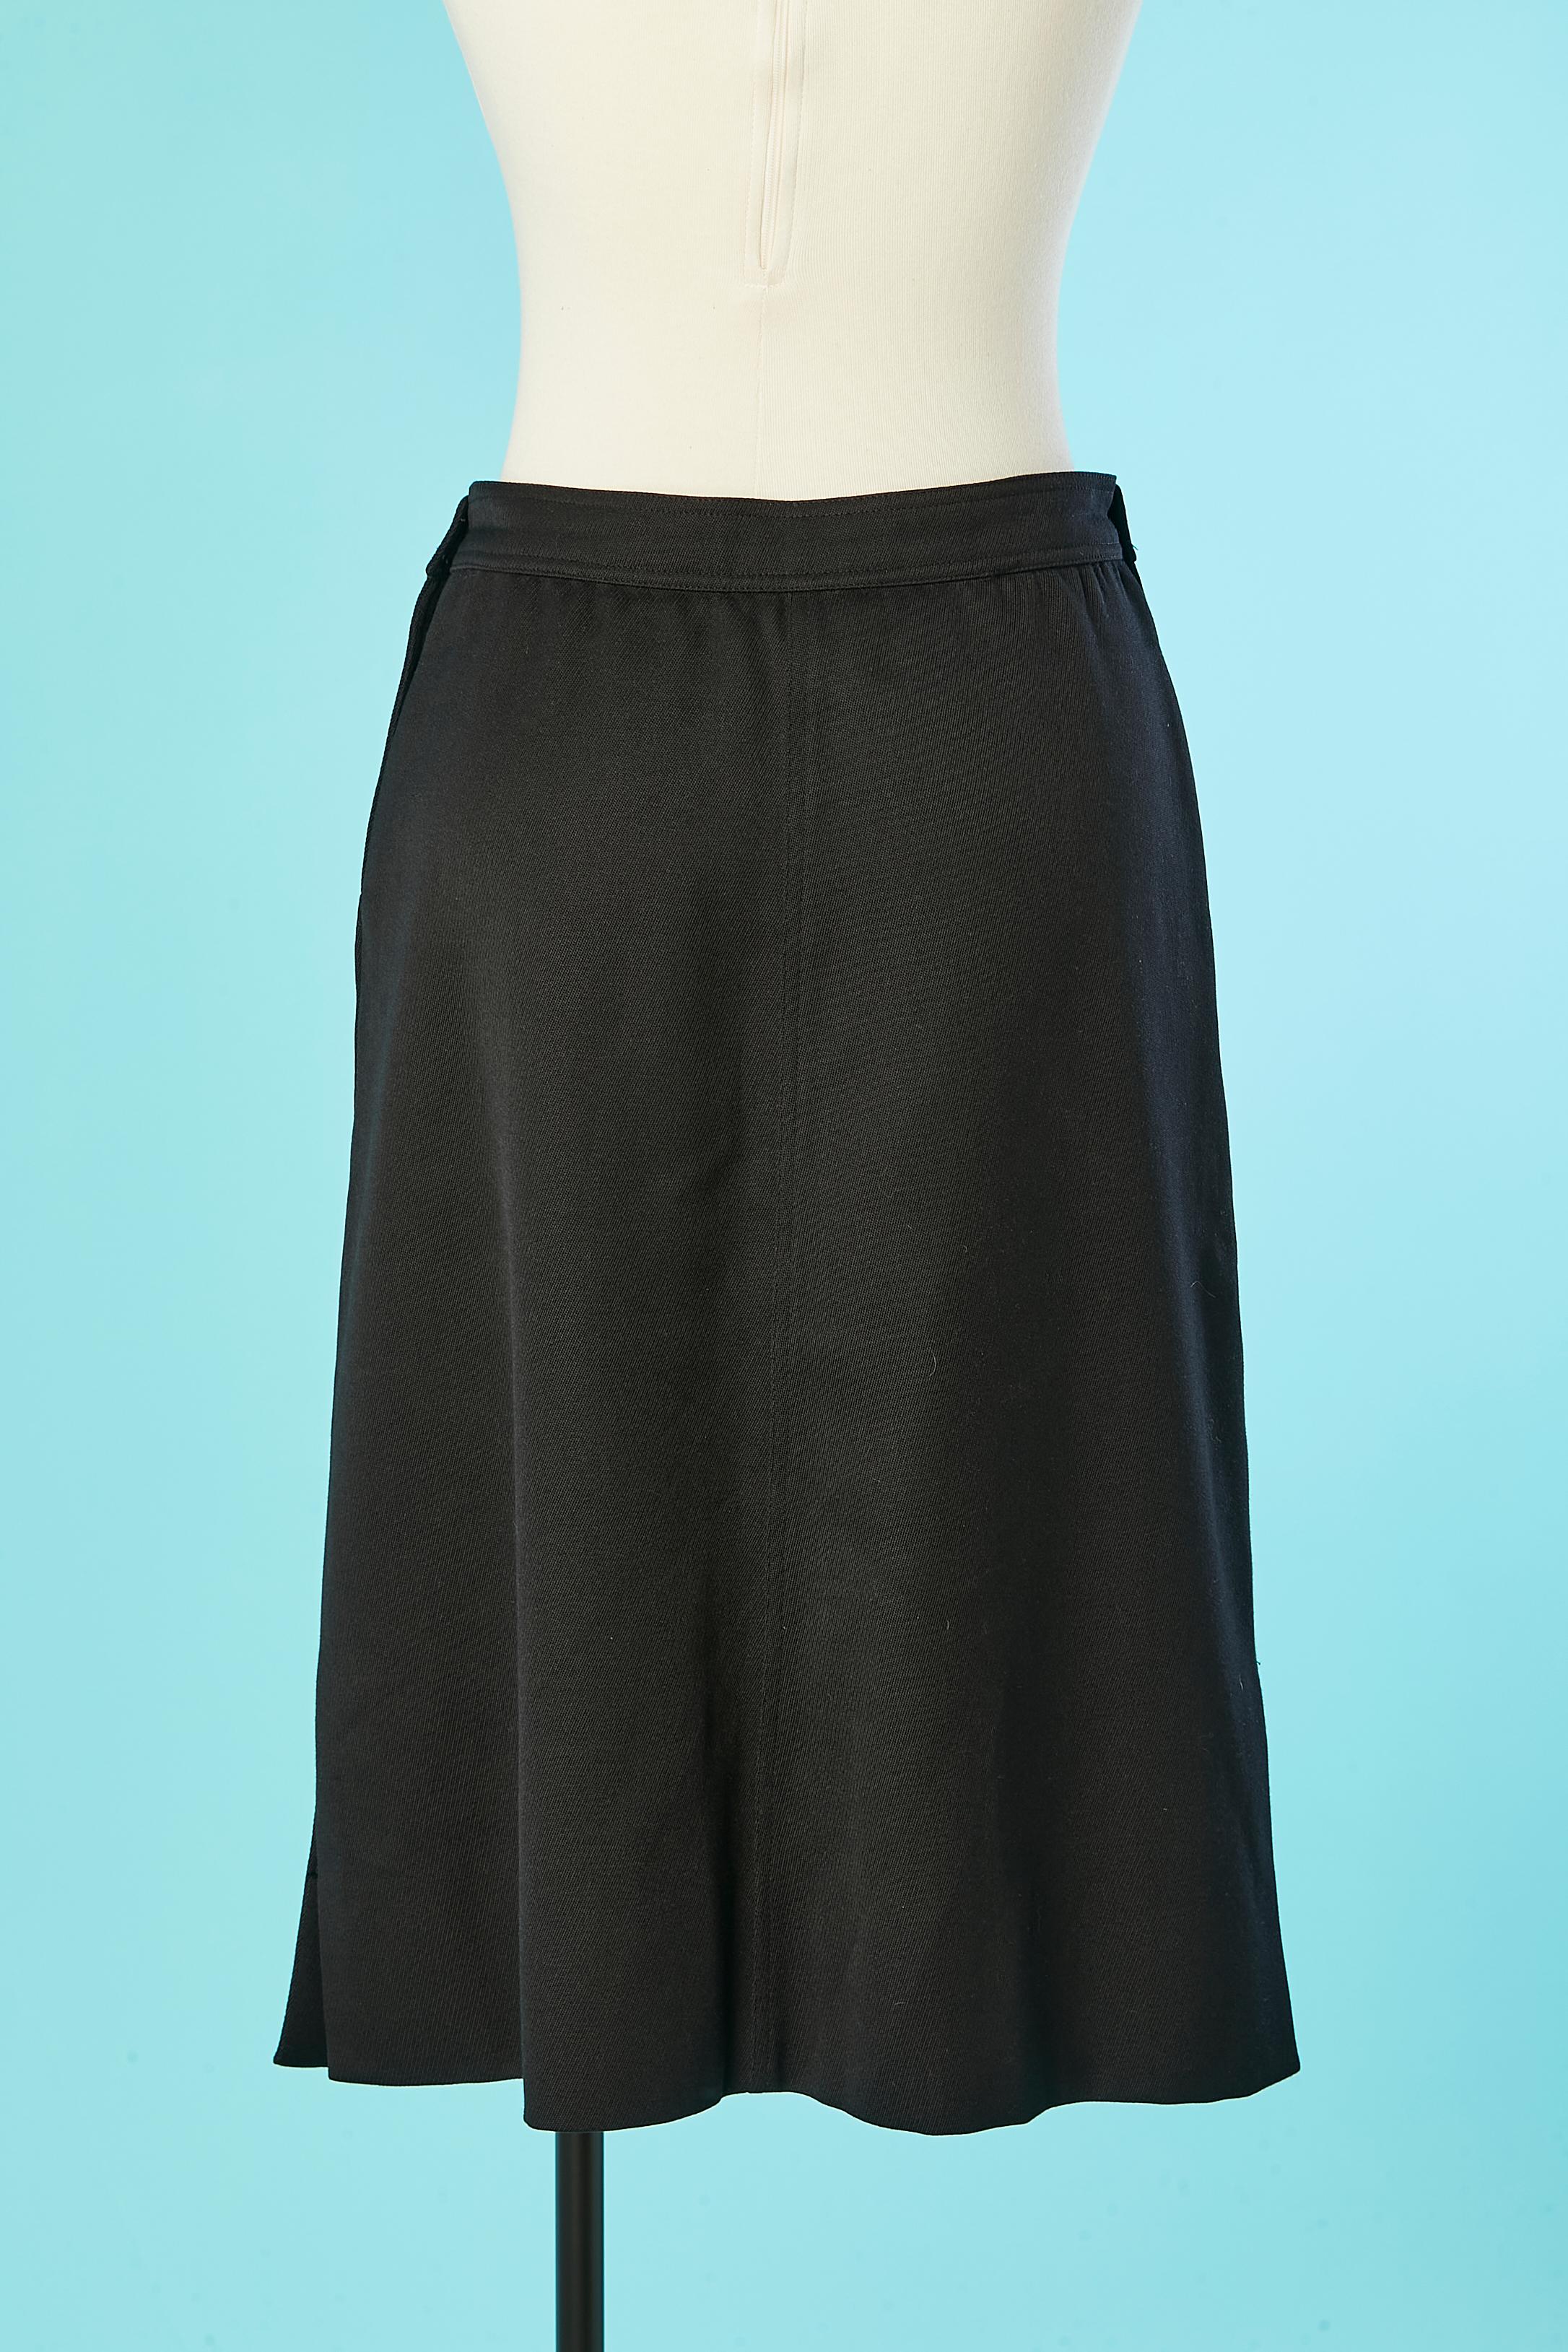 Black A-line skirt with branded button Courrèges Circa 1970's  For Sale 1